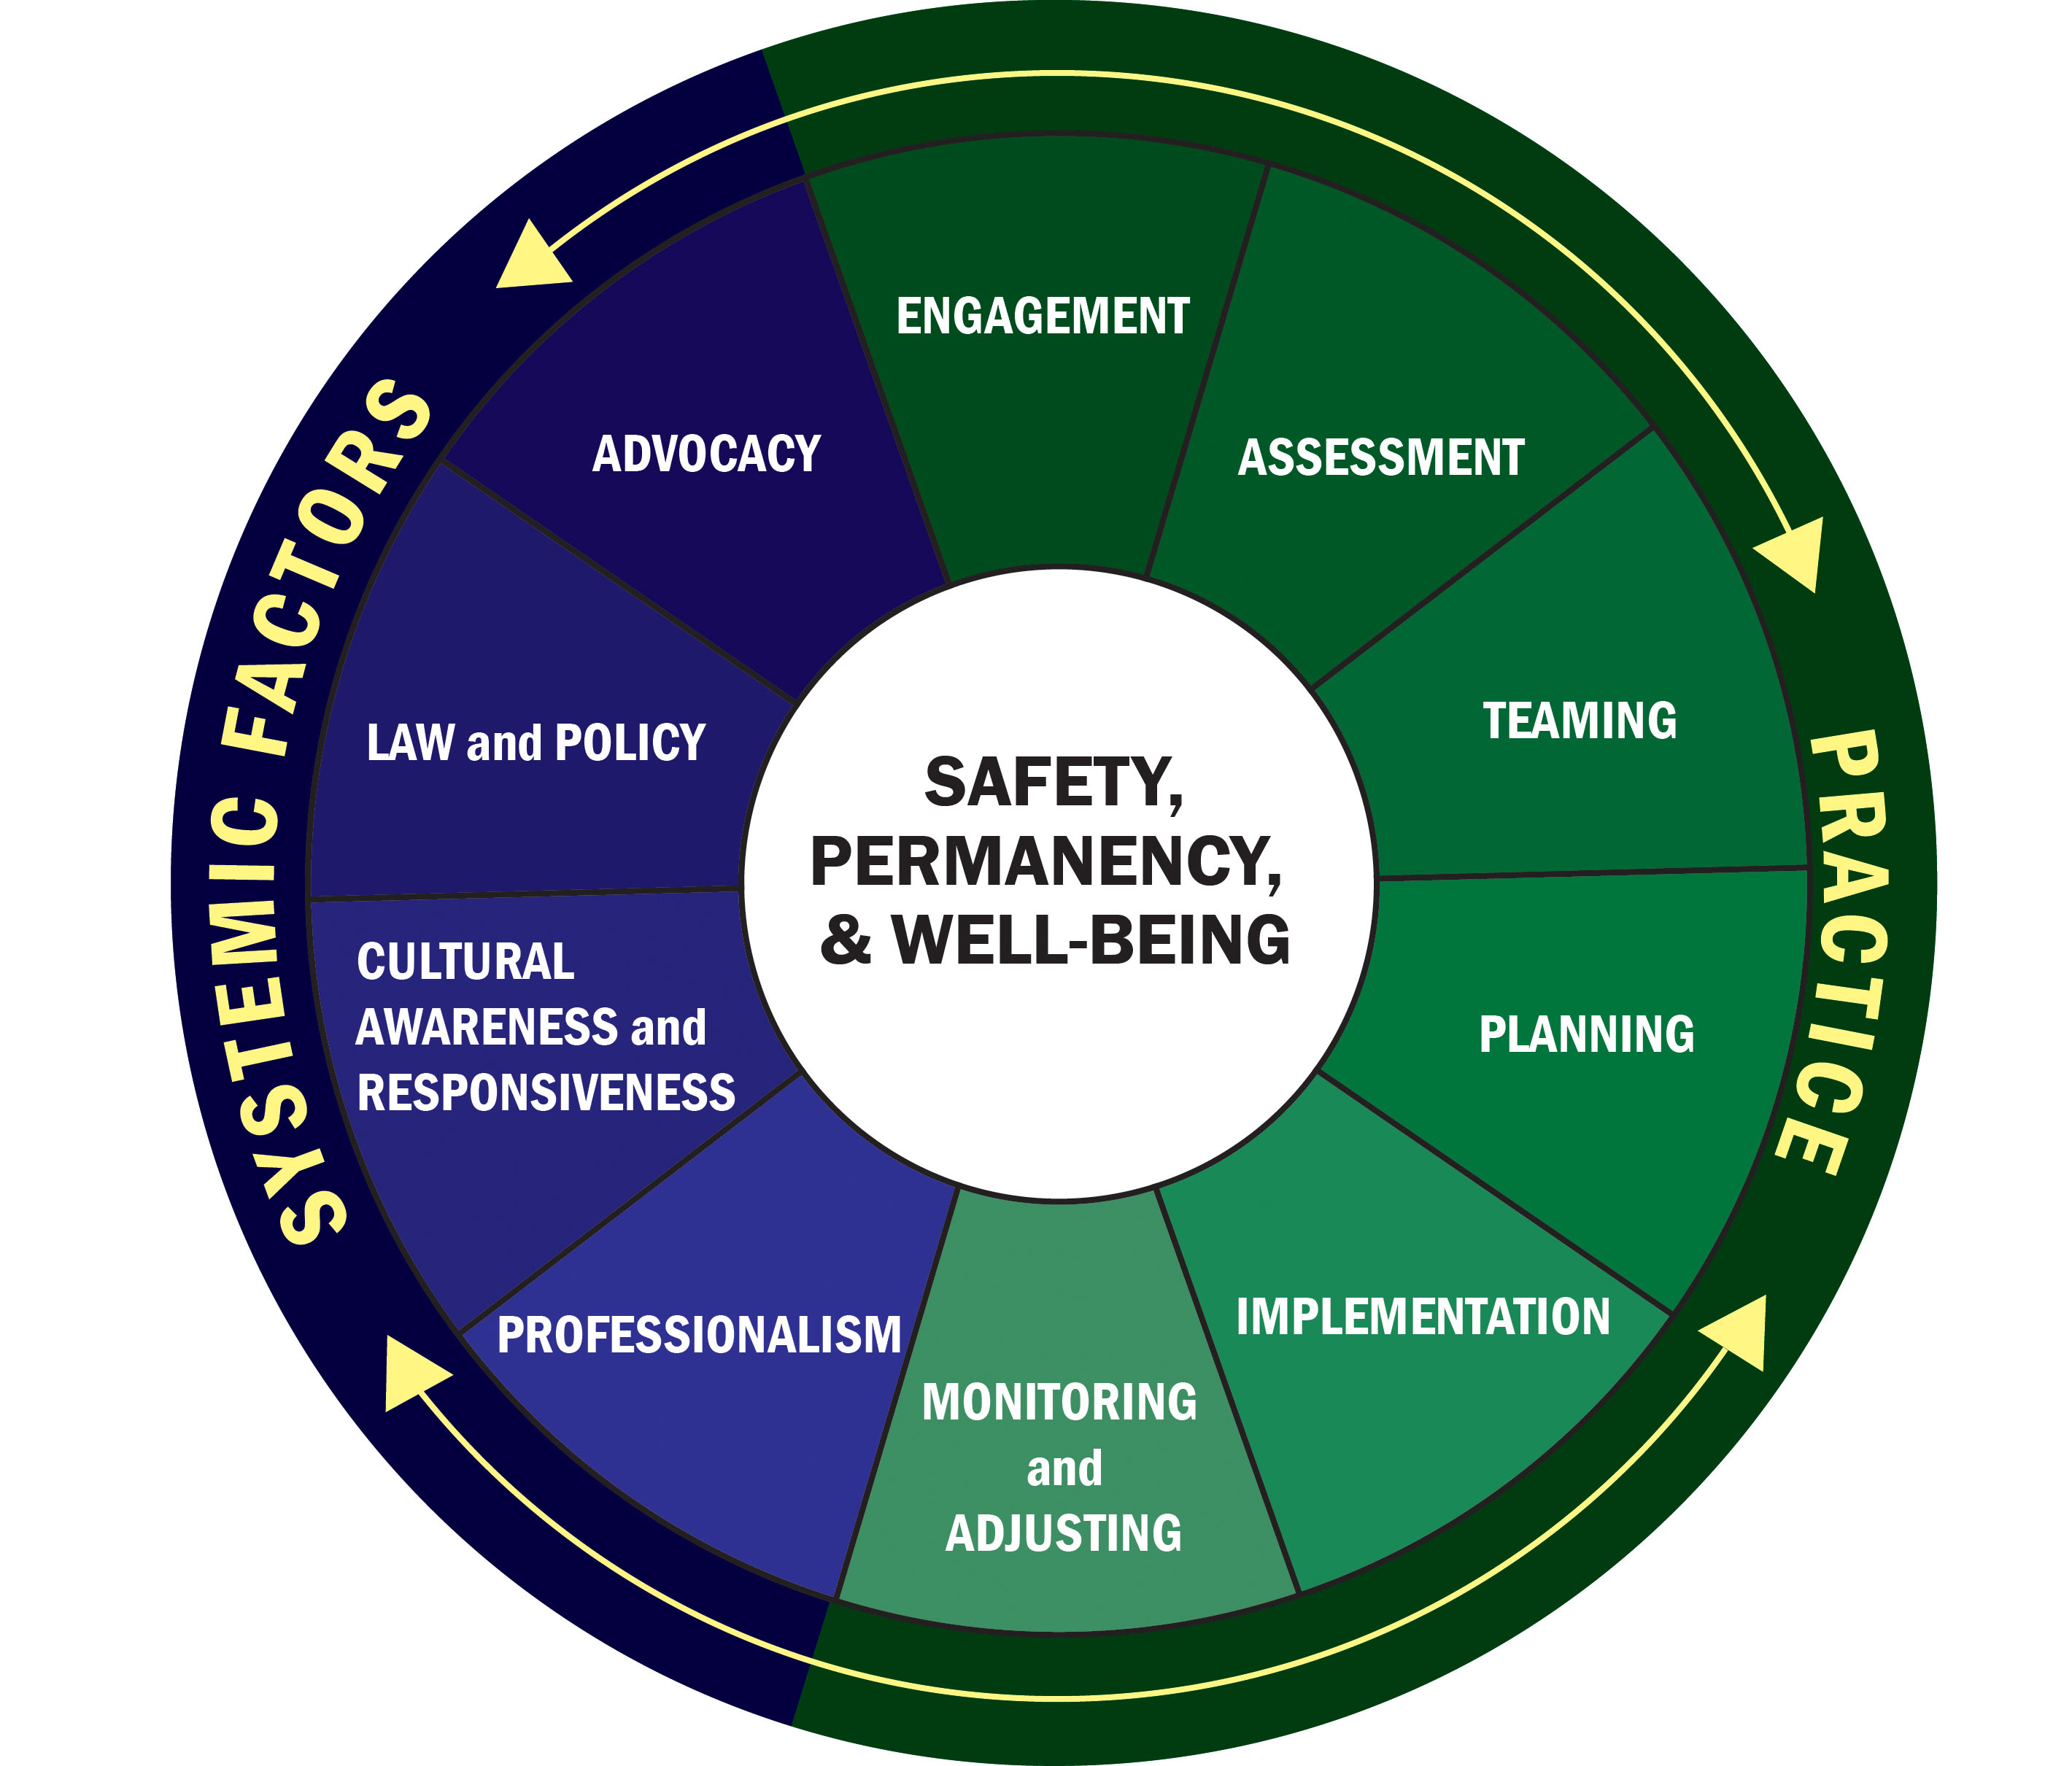 There are 10 competencies that help us achieve the outcomes of Saftey, Permanency, and Well-Being. They are Engagement, Assessment, Teaming, Planning, Implementation, Monitoring and Adjusting, Cultural, Responsiveness and Awareness, Law and Policy, and Advocacy. 